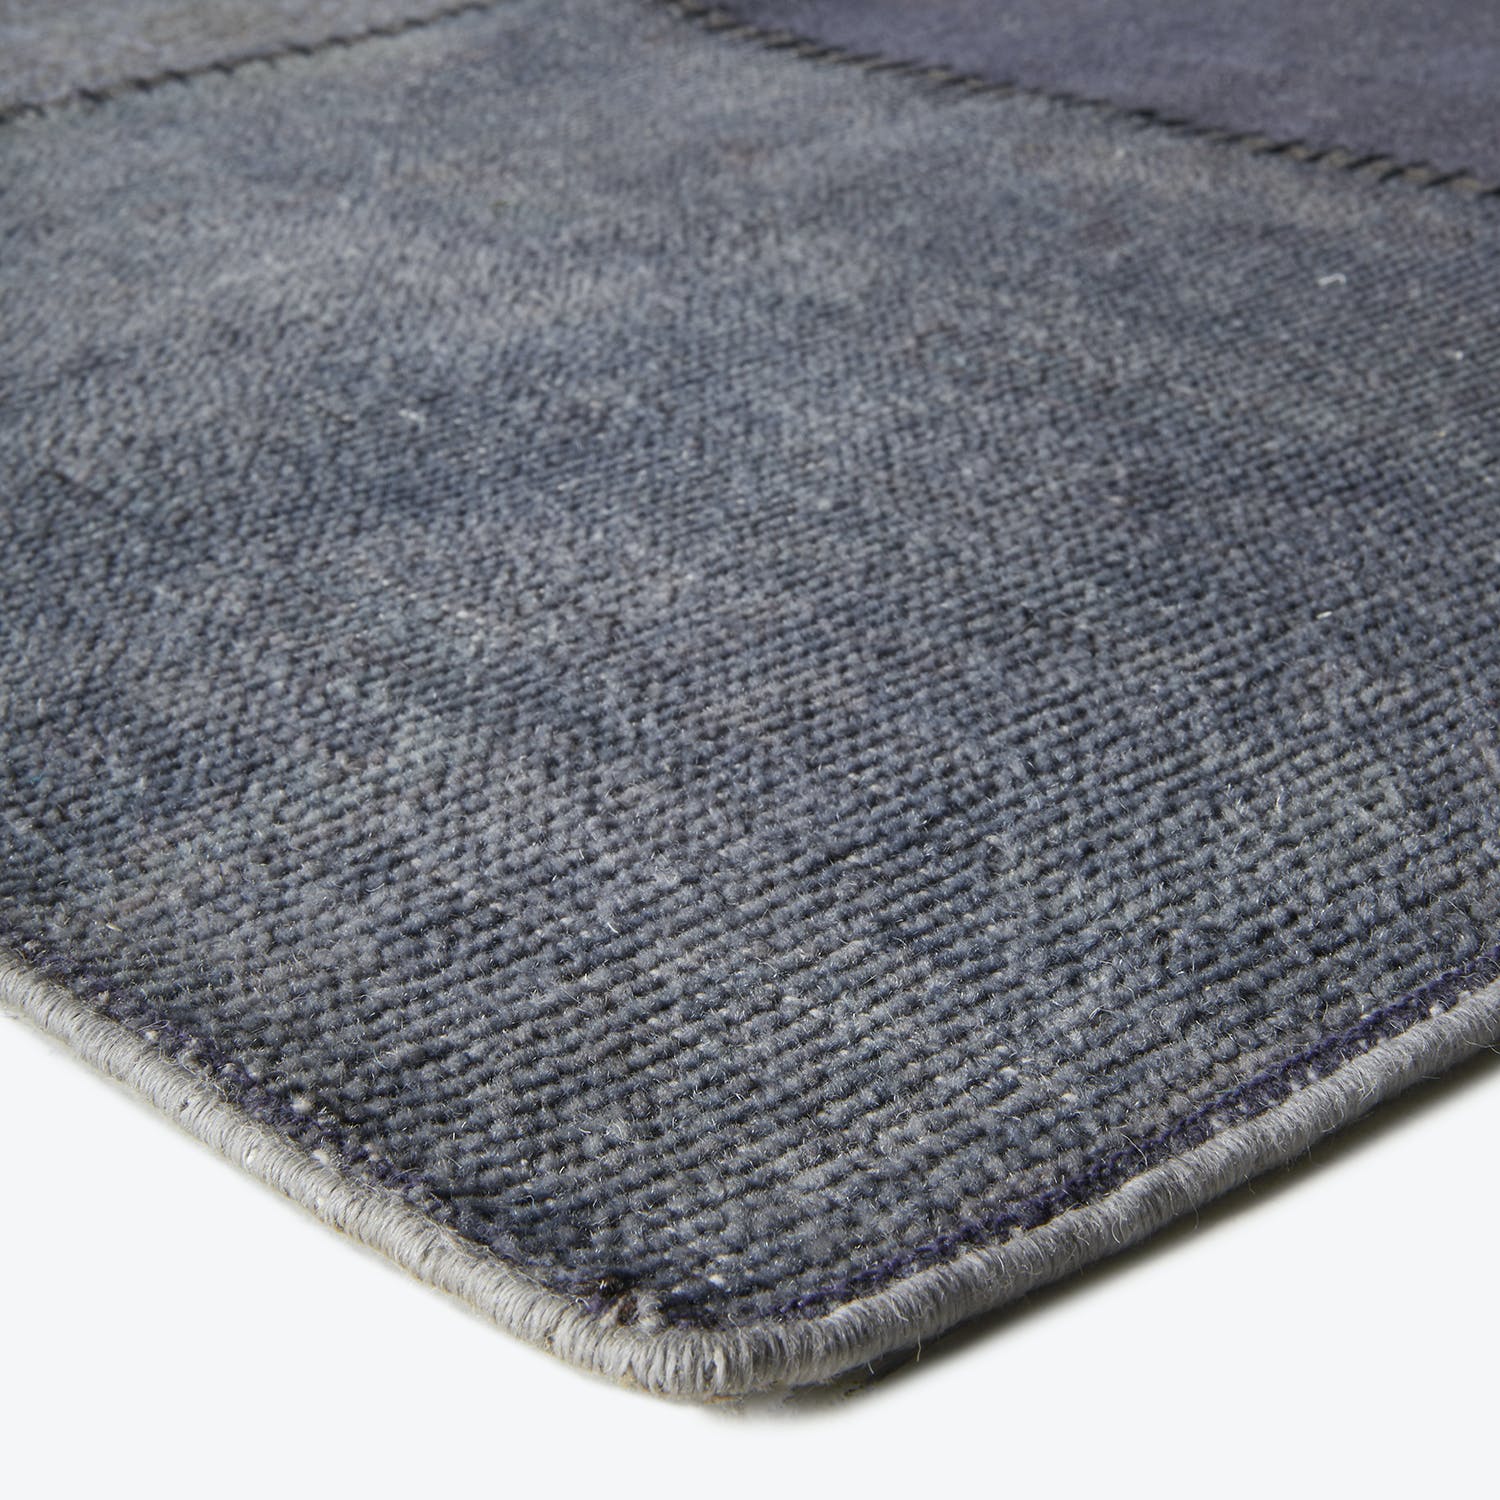 Close-up of a gradient fabric rug with tight construction and hemmed edges.